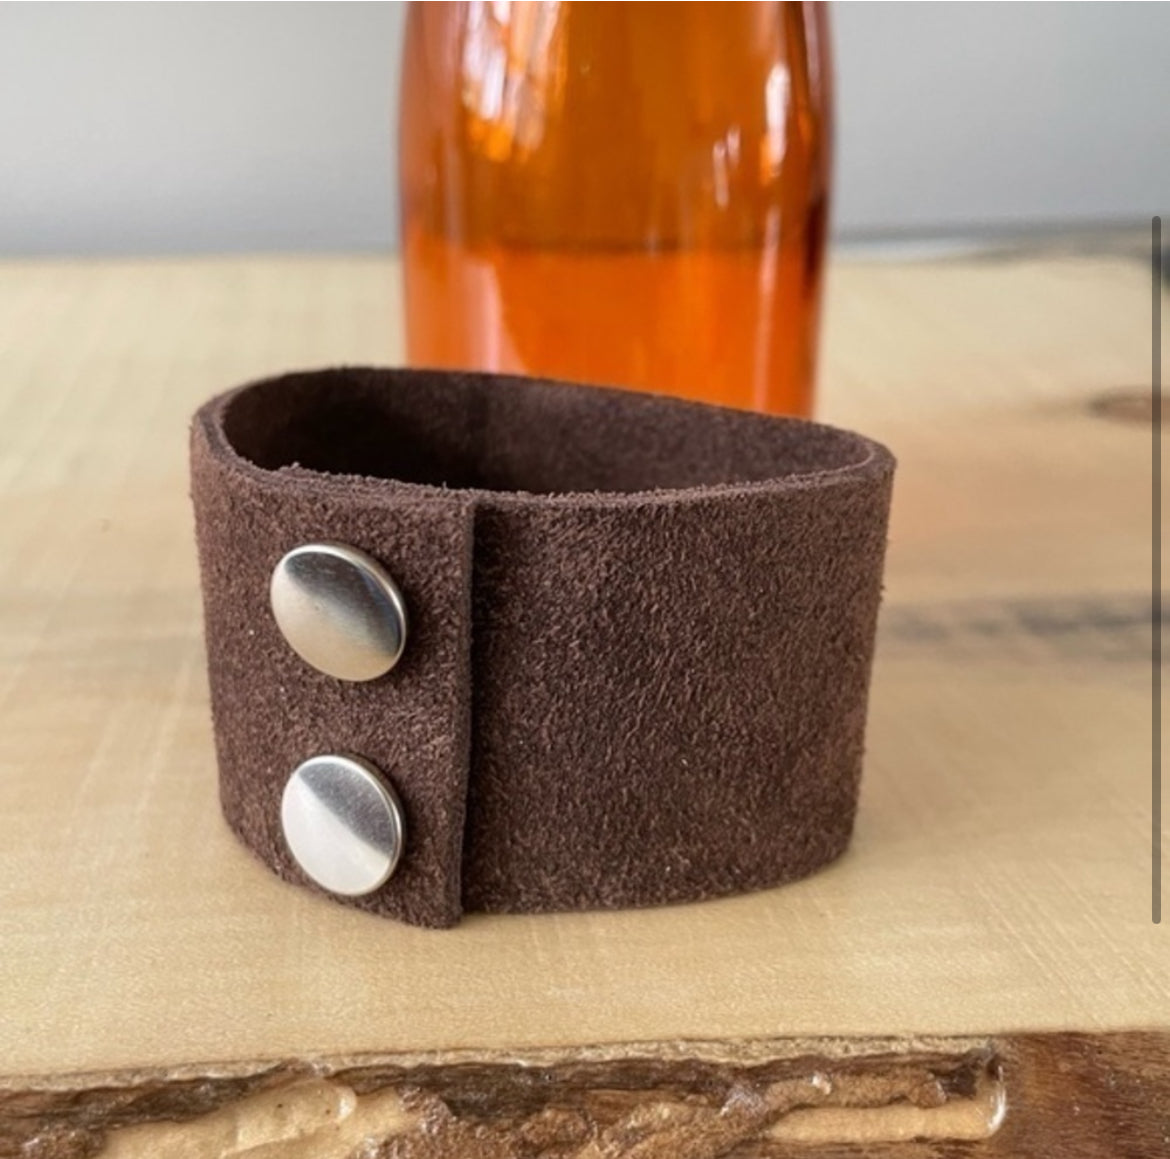 Handmade “Think Happy Thoughts” Soft Brown Suede & Blue Leather Cuff Bracelet Mixed Metal Dual Snap Inspiration Positive Motivational Men Women